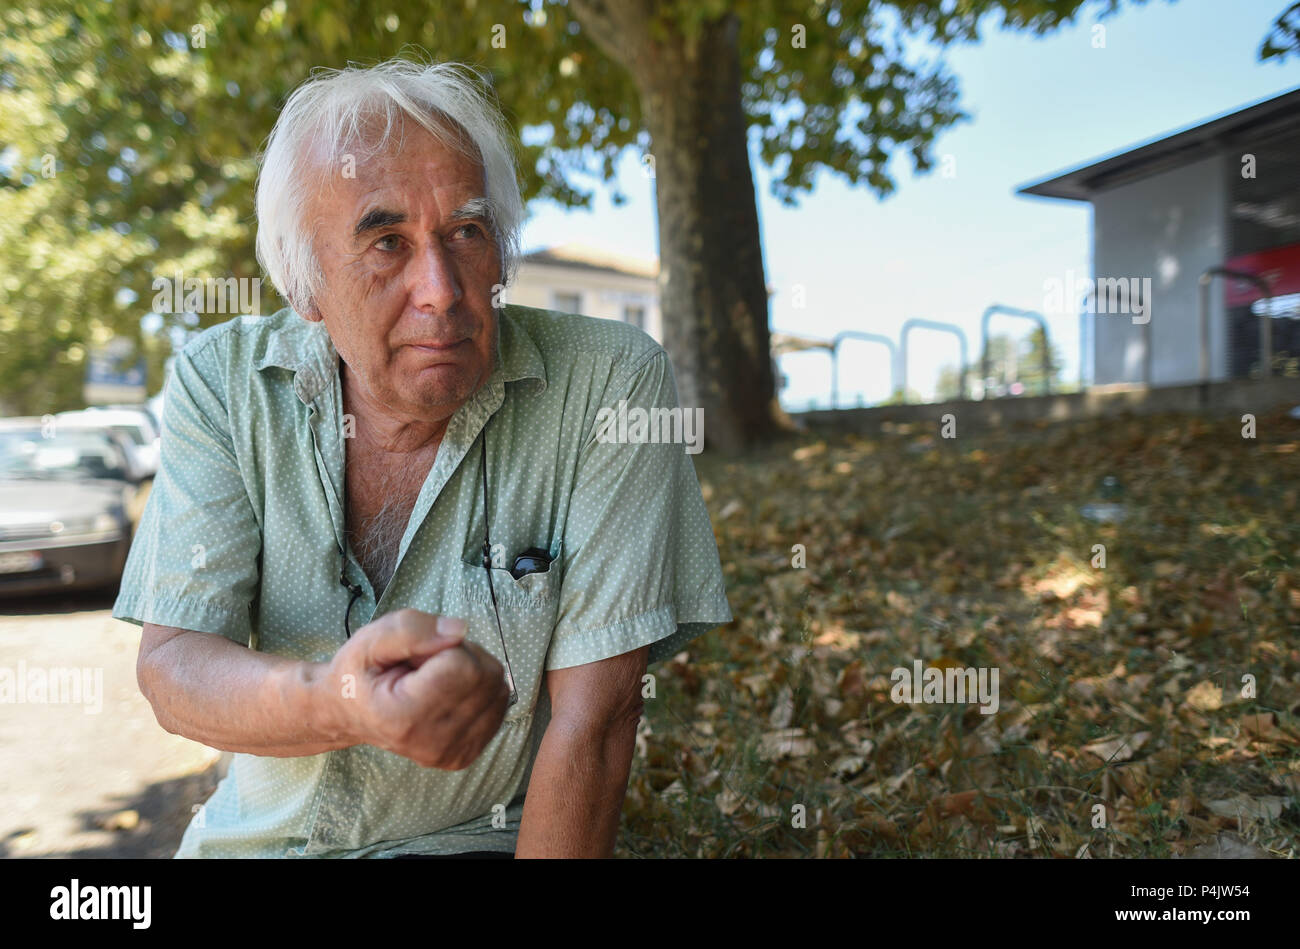 August 12, 2015 - Lunel, France: Portrait of Jacques Durand, a French writer and expert on bullfighting. Despite growing opposition from animal right groups, bullfighting remains popular in southern France. Bullfighting aficionados report that the practice is even more genuine in southern France than in neighboring Spain because bullfighting is being organized at a municipal level, by groups of people committed to the tauromachy traditions. Portrait de Jacques Durand, expert de tauromachie. Stock Photo